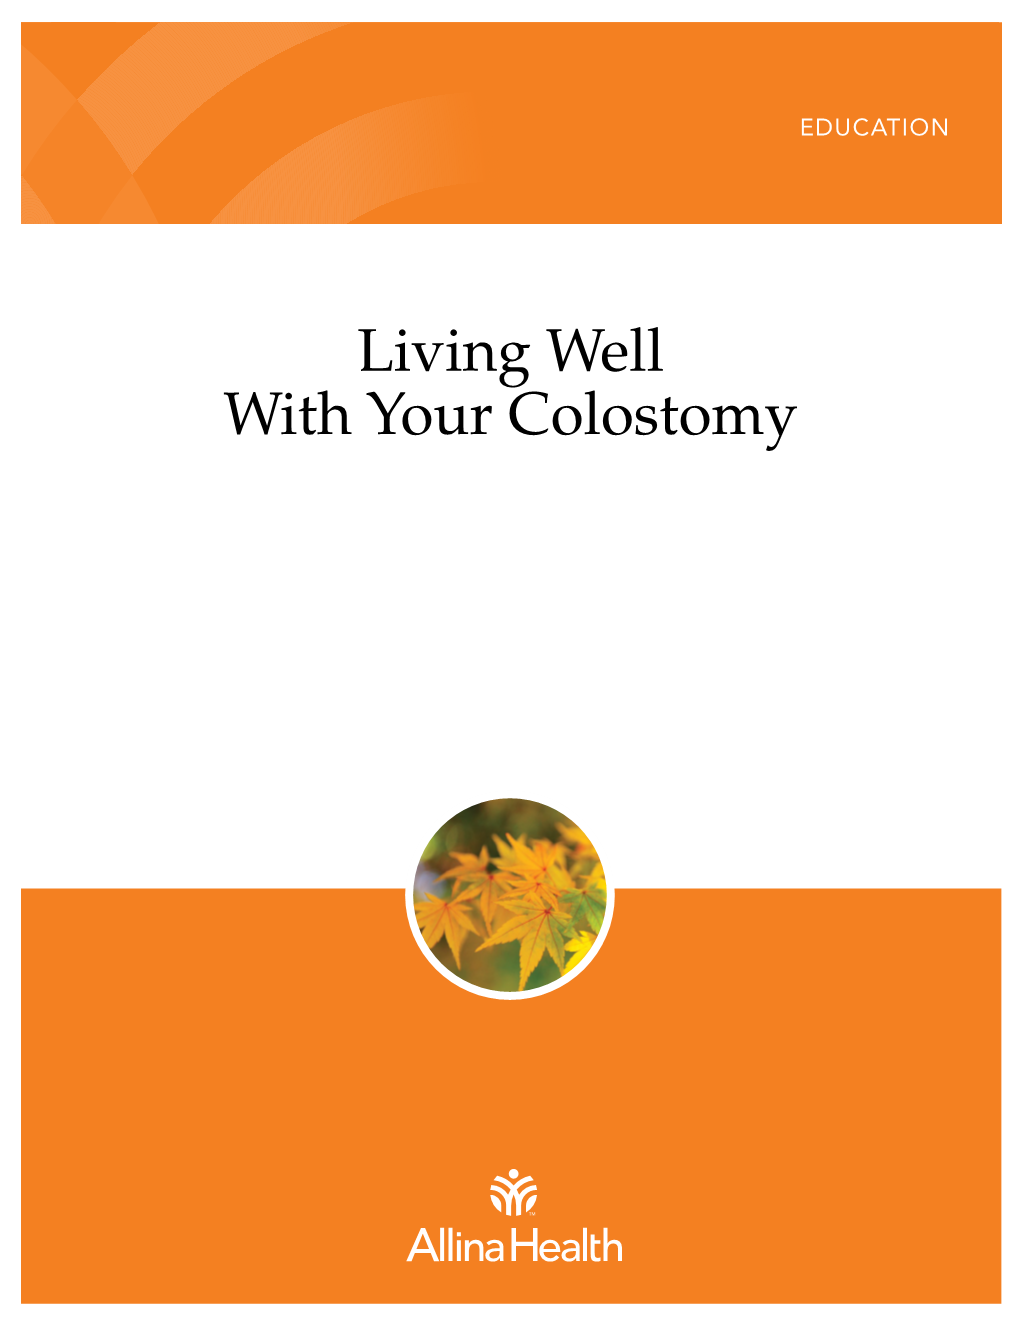 Living Well with Your Colostomy